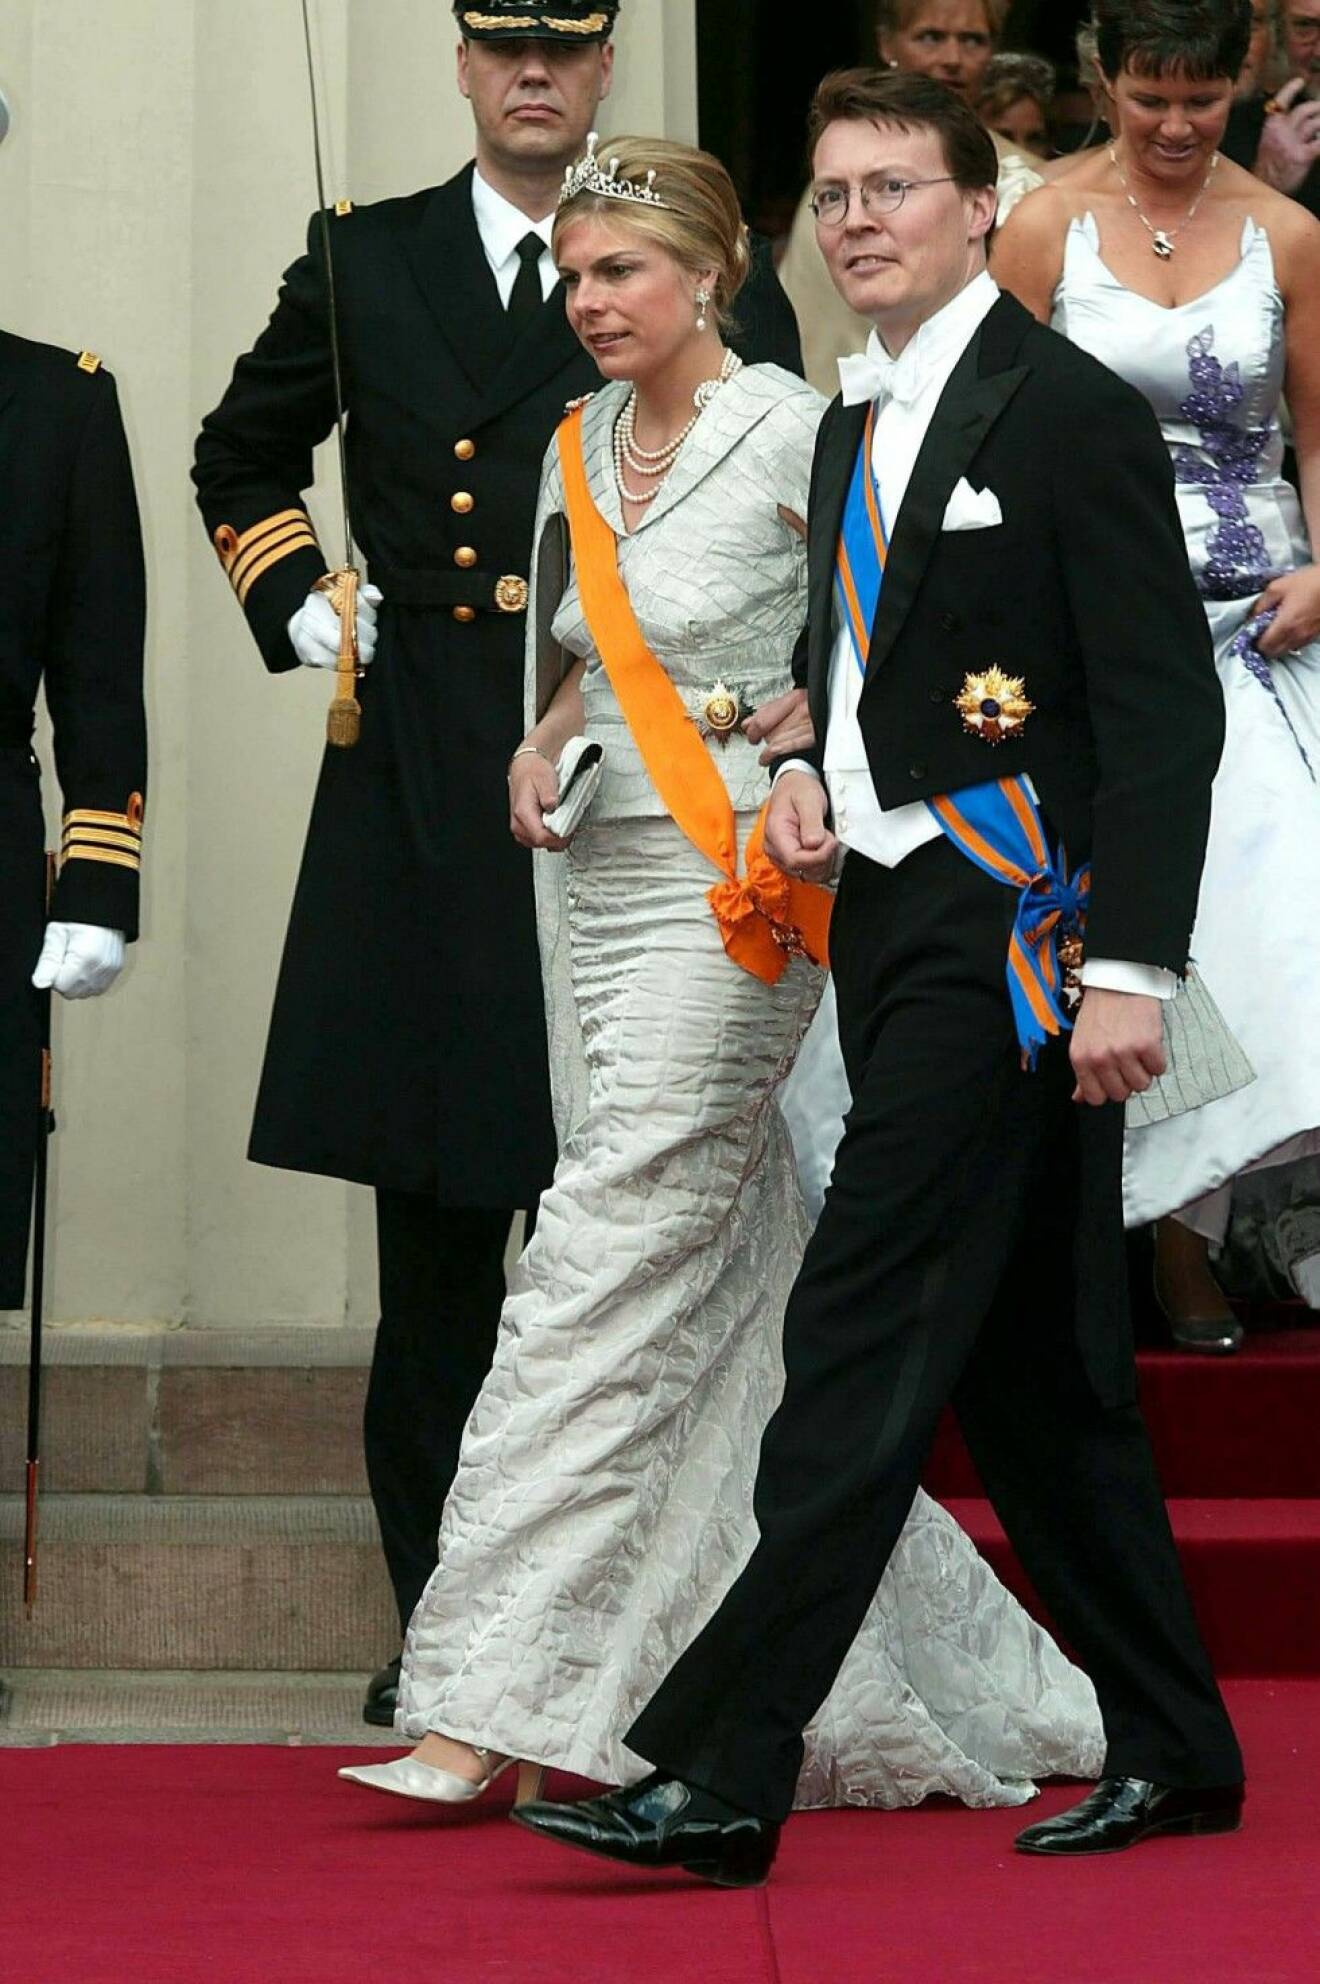 WEDDING OF CROWN PRINCE FREDERIK AND MARY DONALDSON, COPENHAGEN CATHEDRAL, DENMARK - 14 MAY 2004